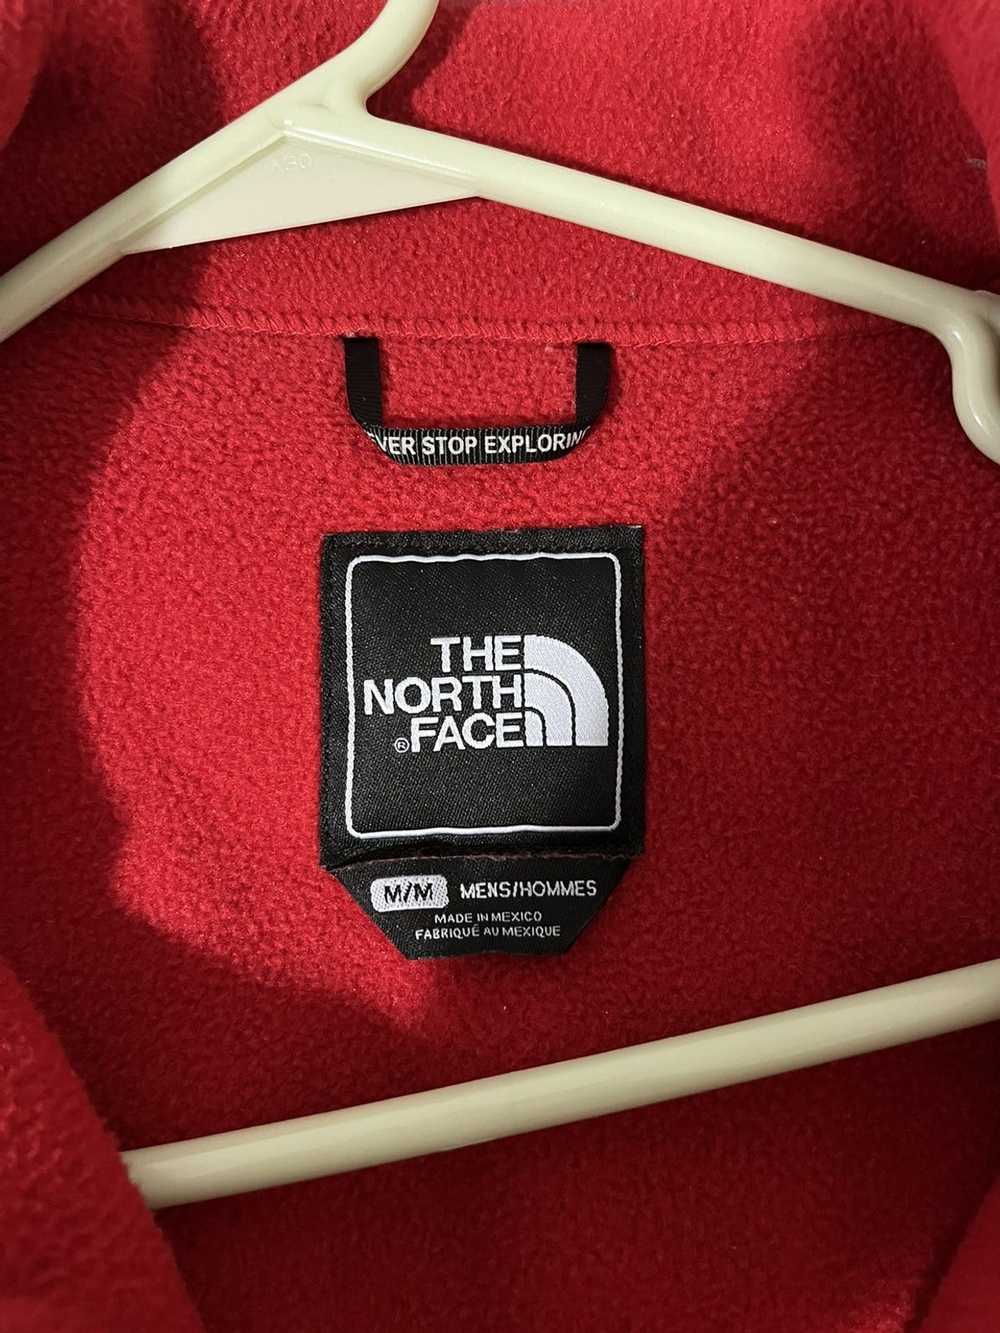 The North Face The North Face Jacket - image 3